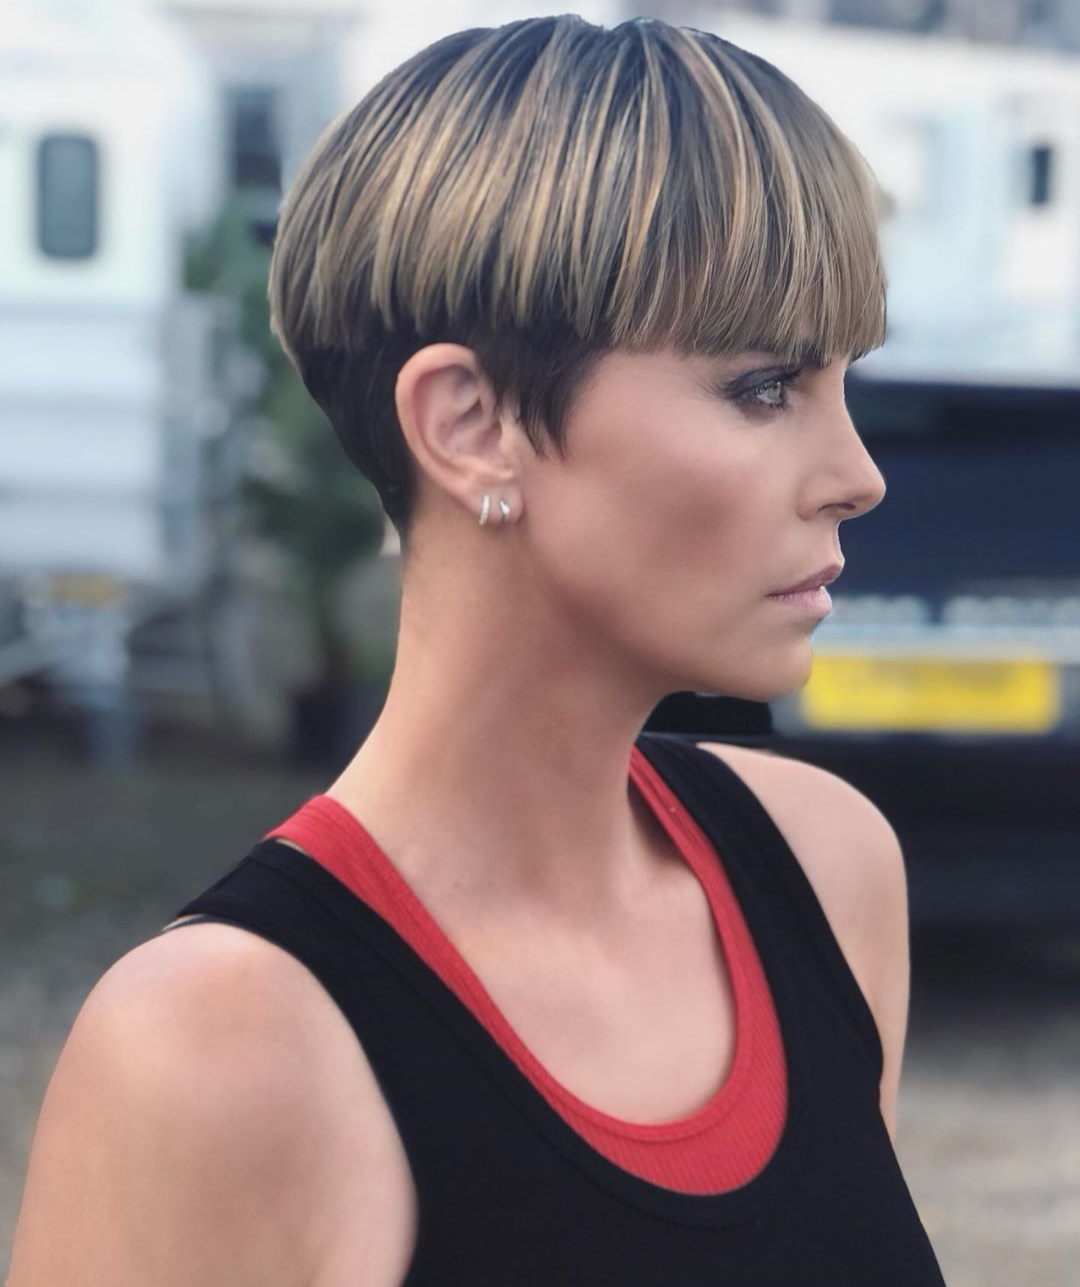 charlize theron cipher fast and furious 9 2020